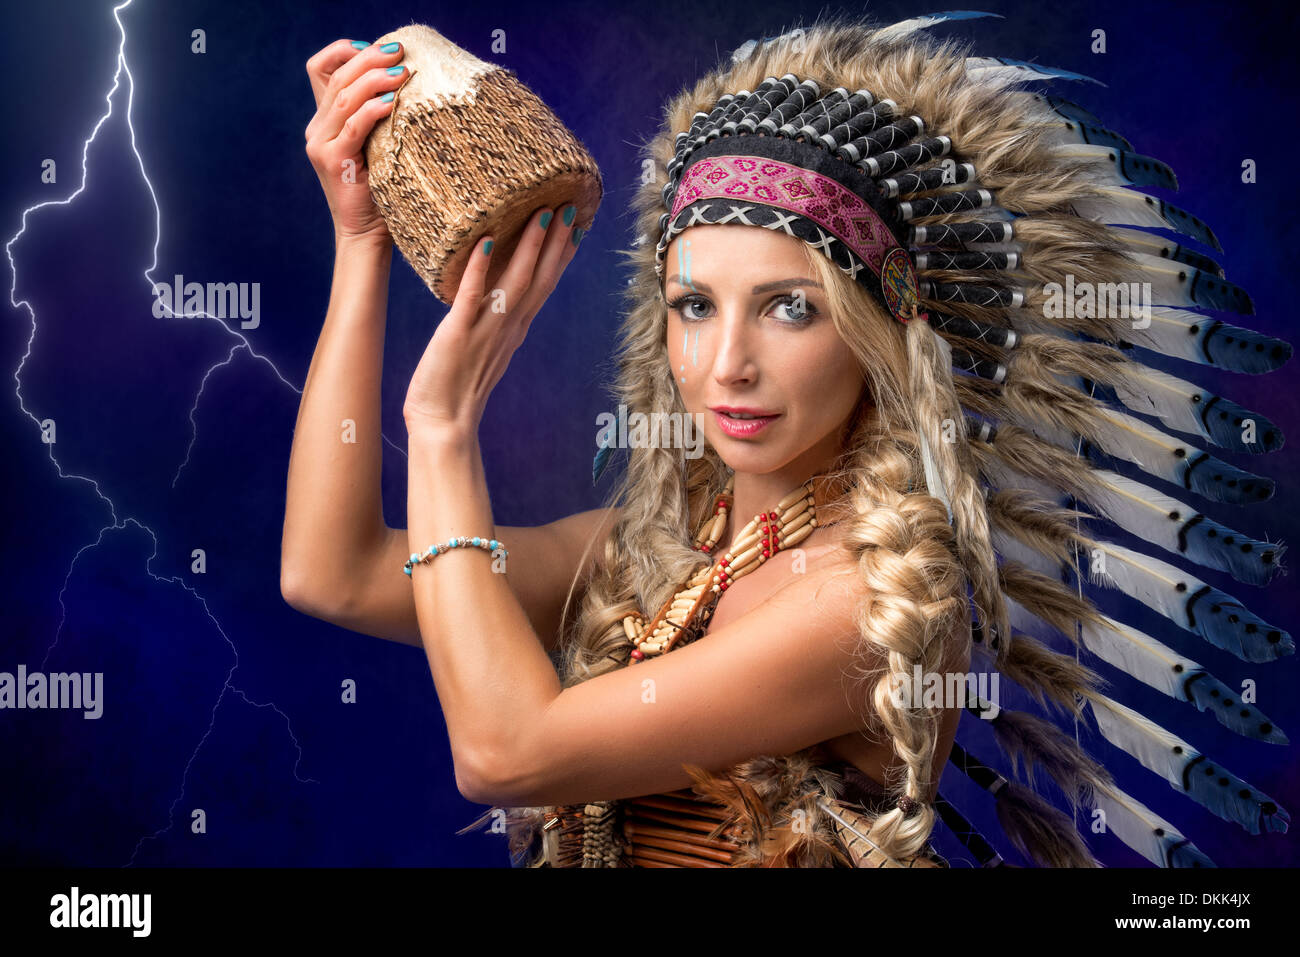 Beautiful woman in native American headpiece with drums Stock Photo